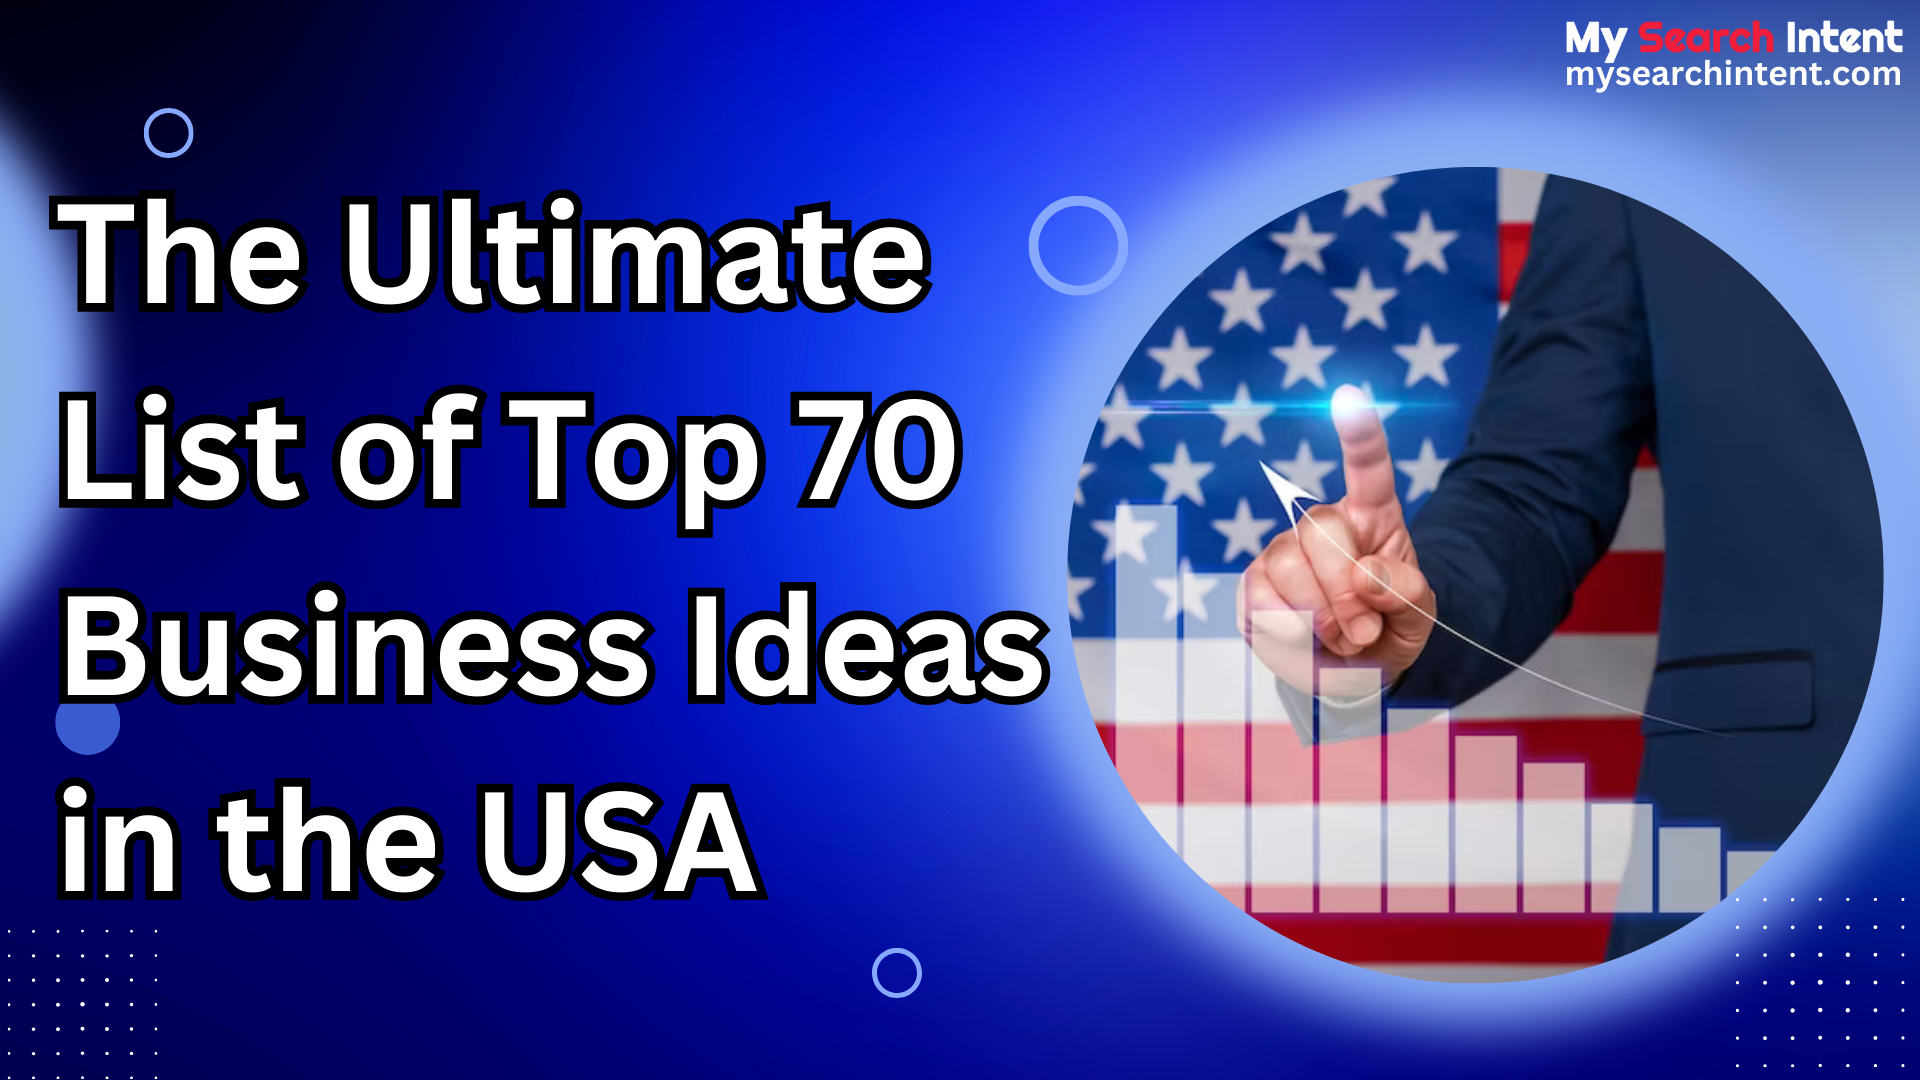 Business Ideas in the USA